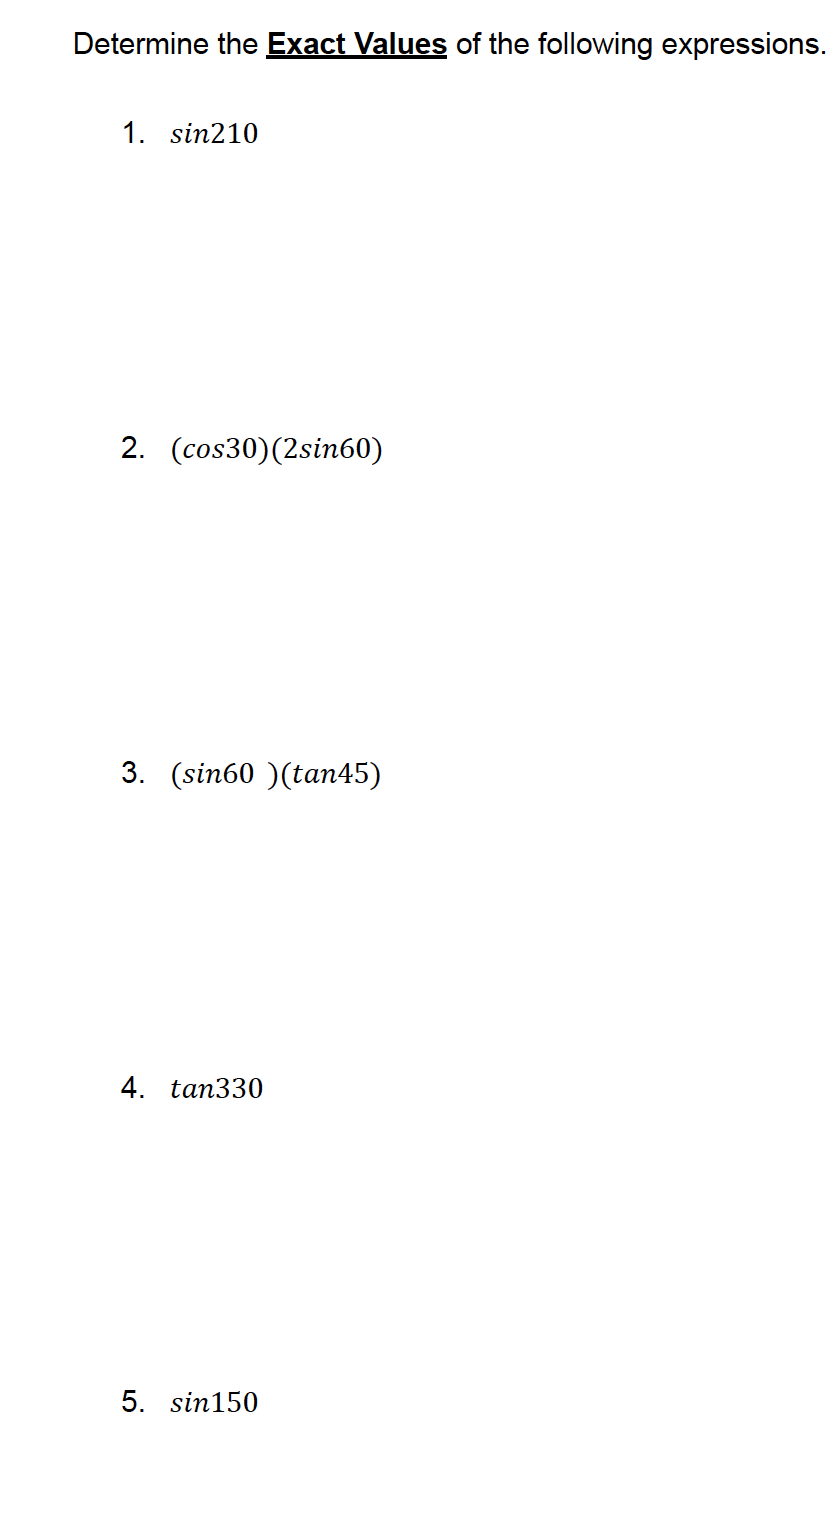 Determine the Exact Values of the following expressions.
1. sin210
2. (cos30) (2sin60)
3. (sin60 )(tan45)
4. tan330
5. sin150